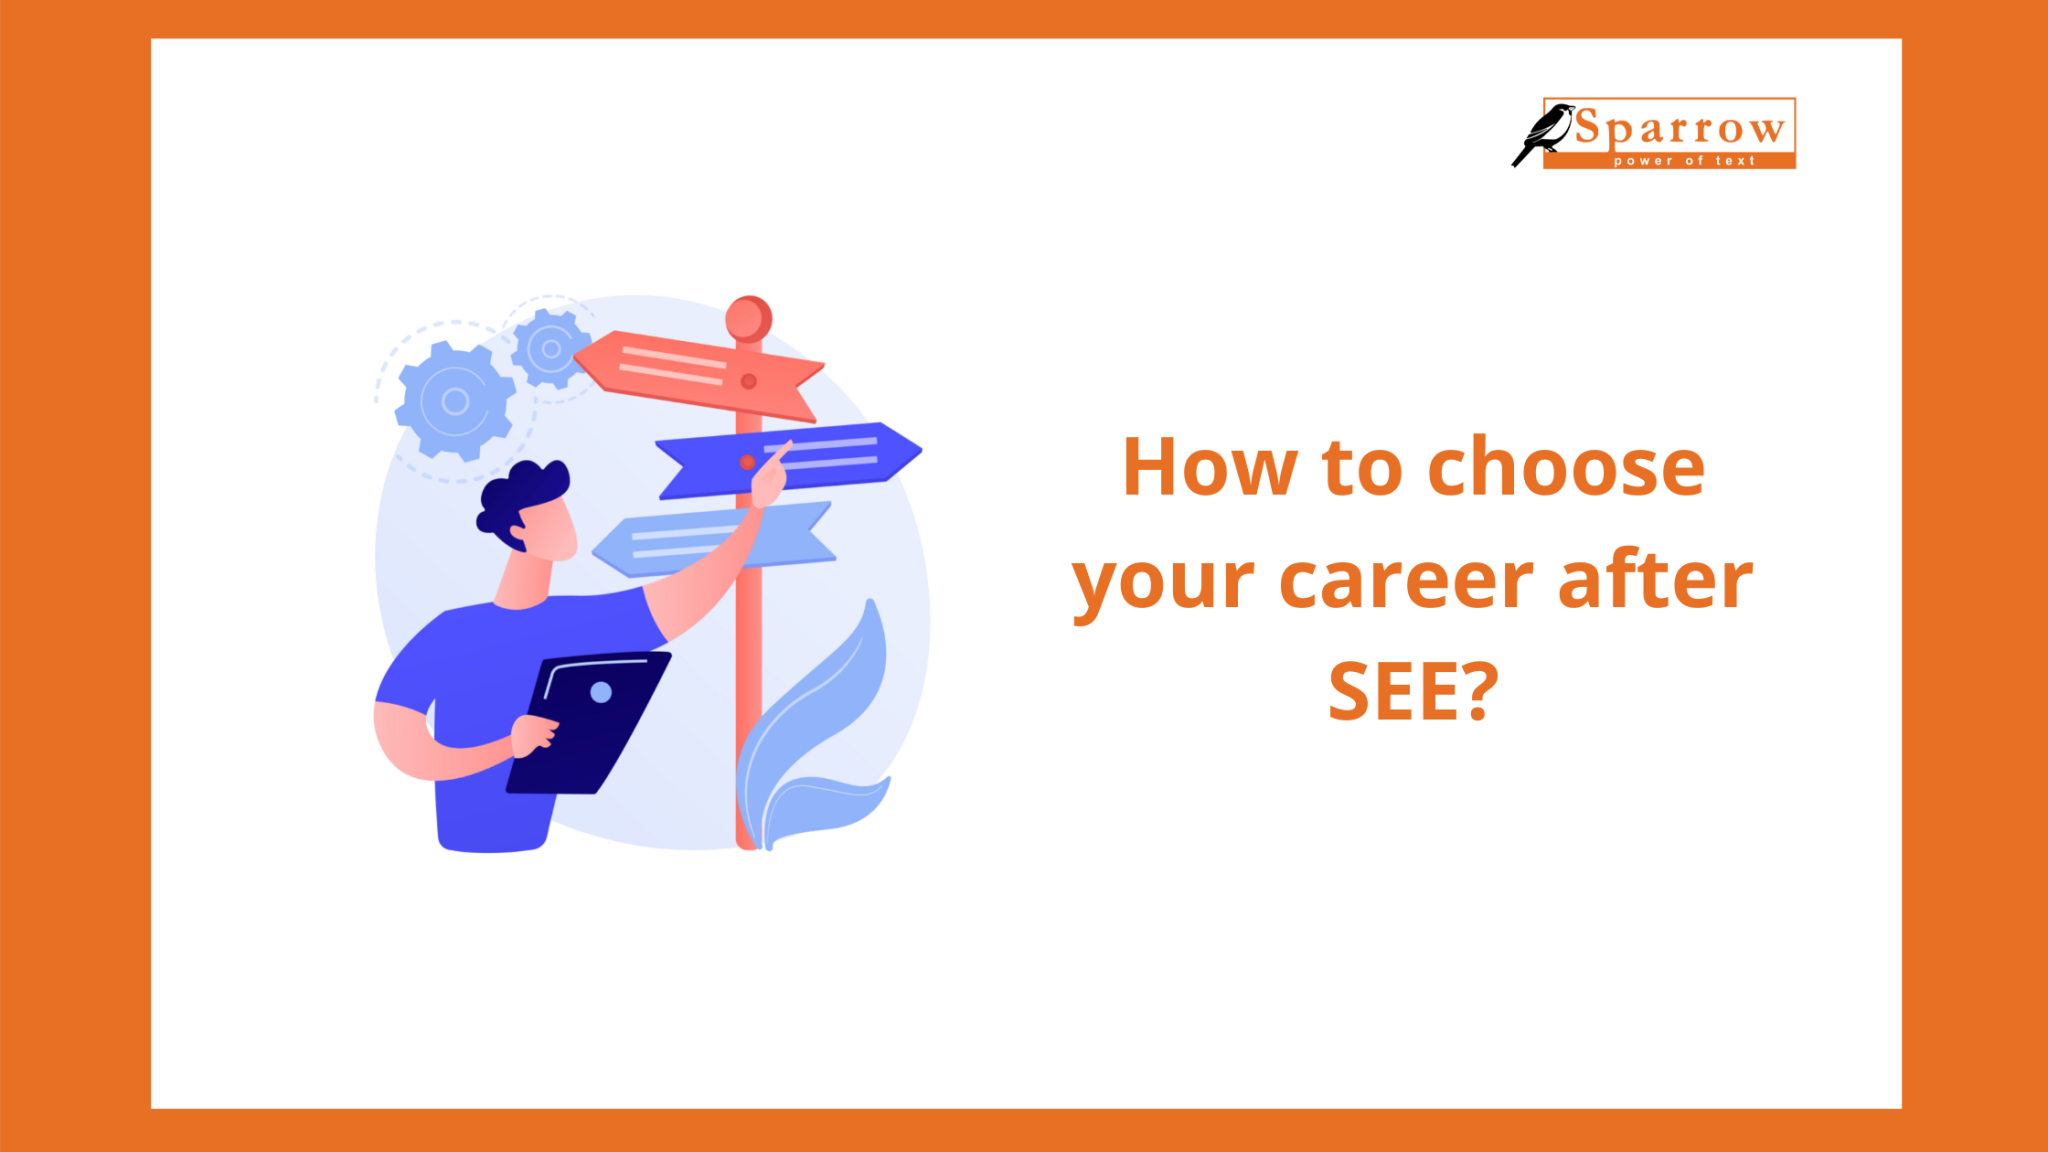 How to choose your career after SEE?